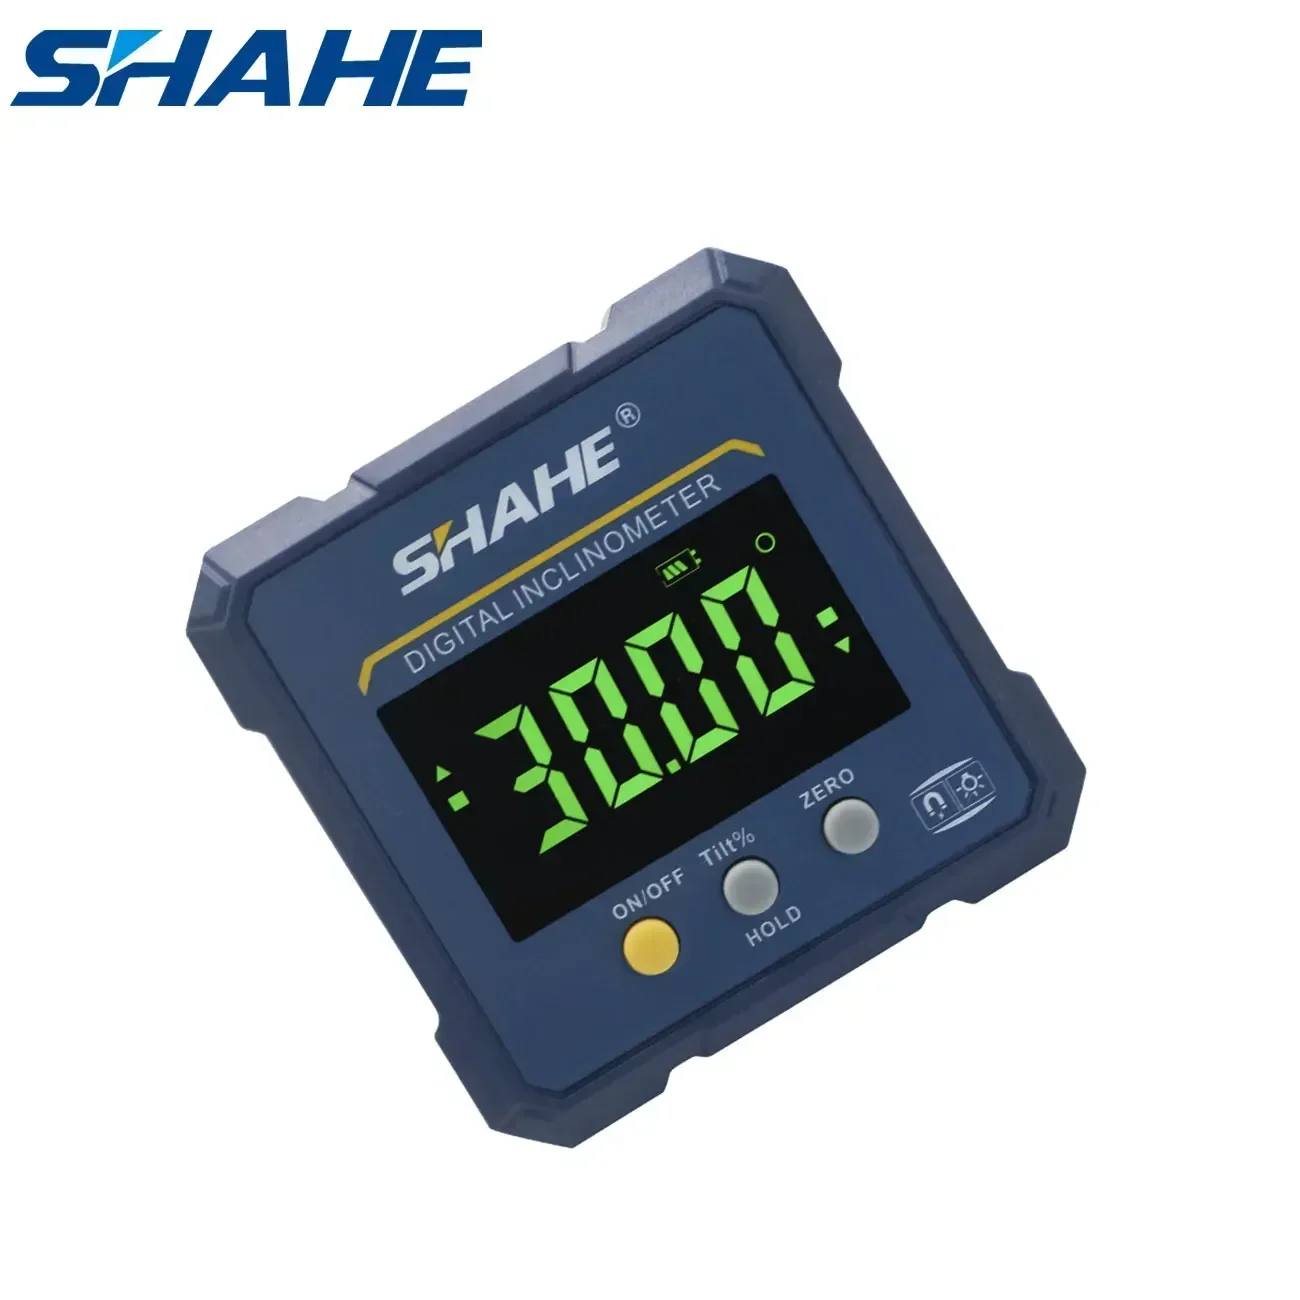 

SHAHE Aluminum Digital Protractor With 4-Sides Magnets Digital Inclinometer Angle Finder High Precision Digital Angle Gauge